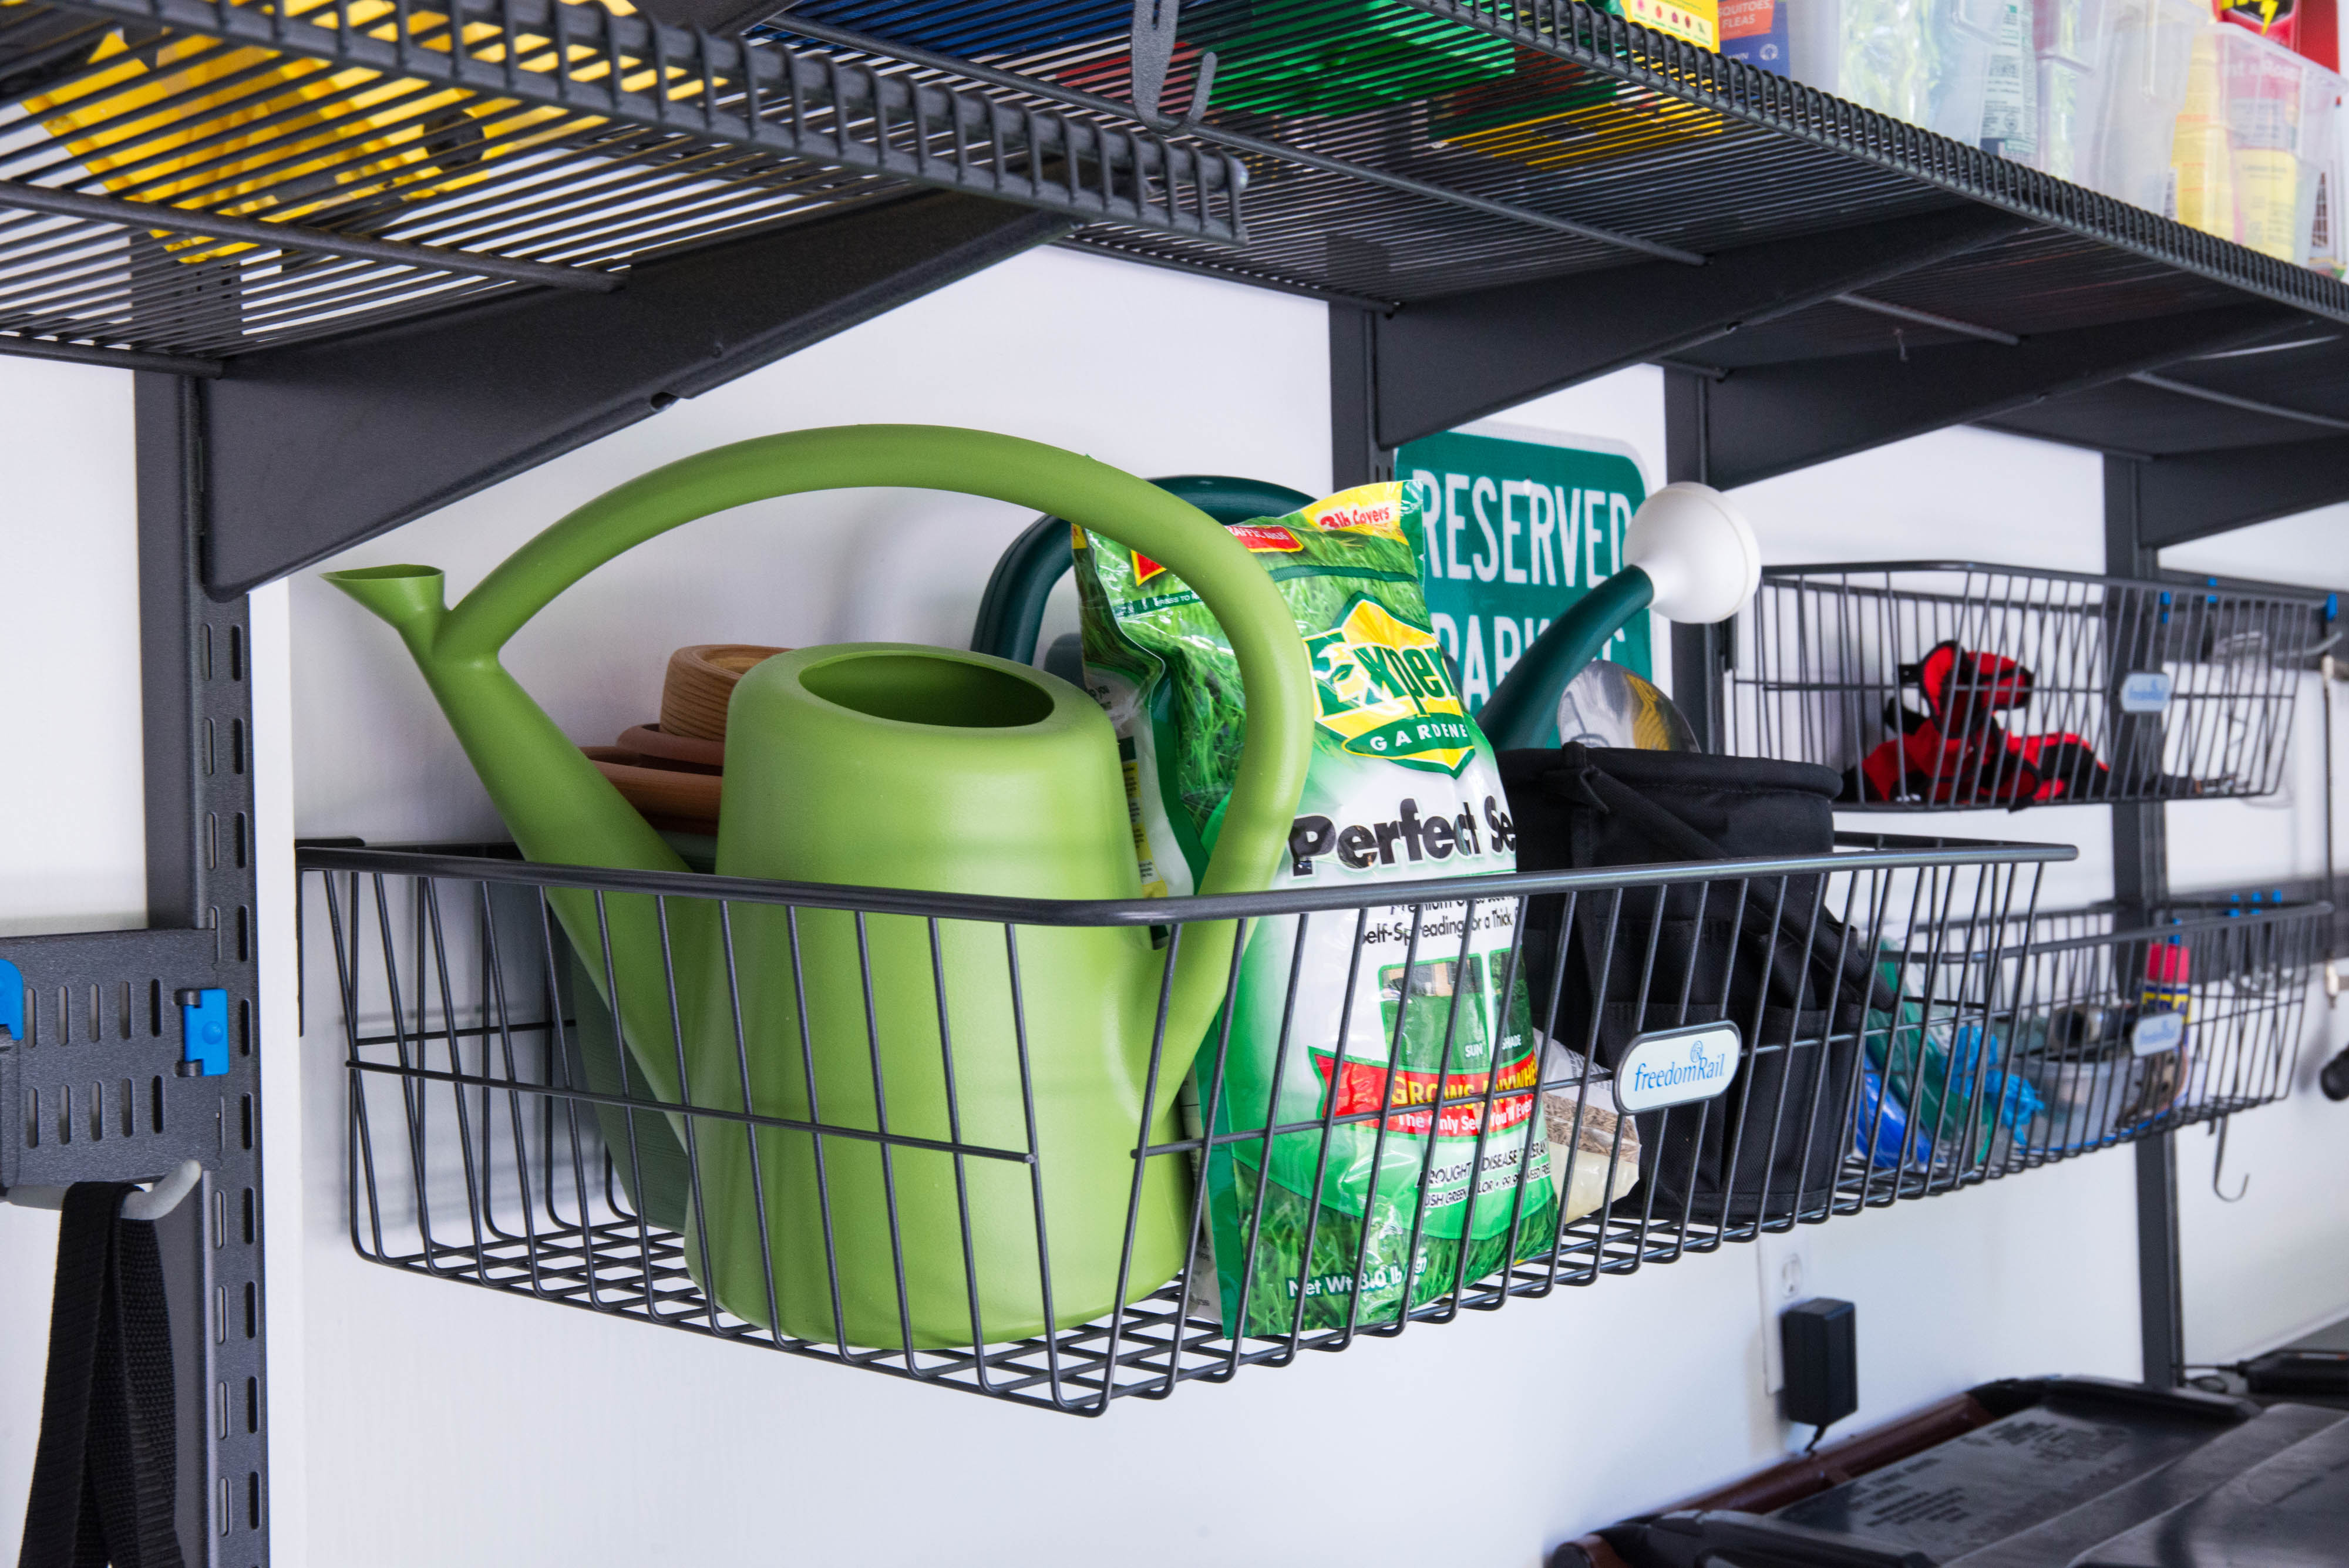 This is an Organized Living freedomRail Garage with granite gray ventilated shelves and baskets. The walls are white and the baskets are holding green watering cans and garden supplies. 